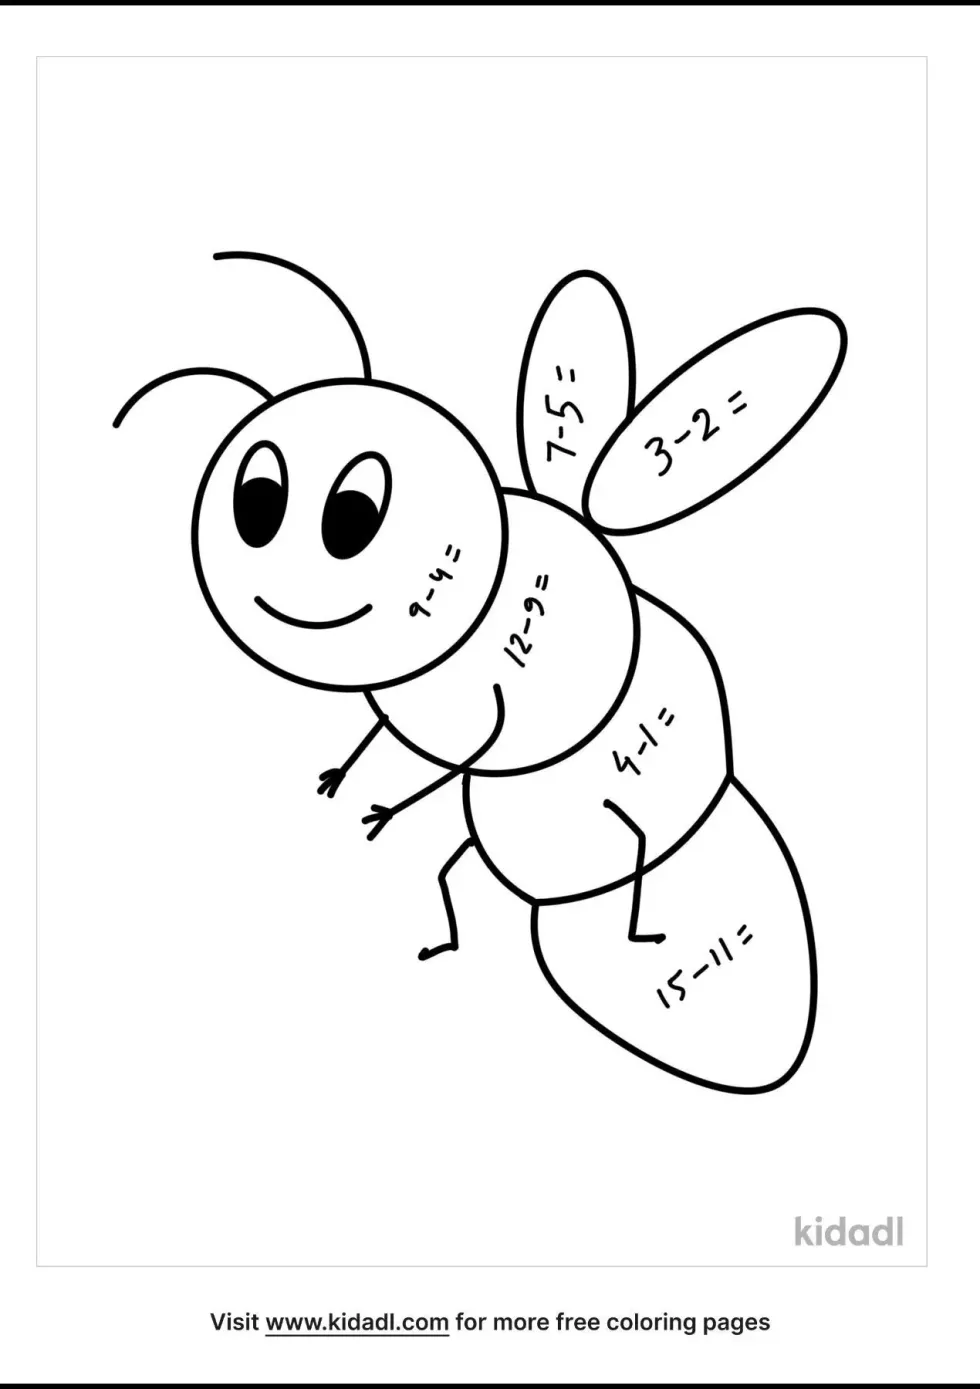 Subtraction Coloring Page